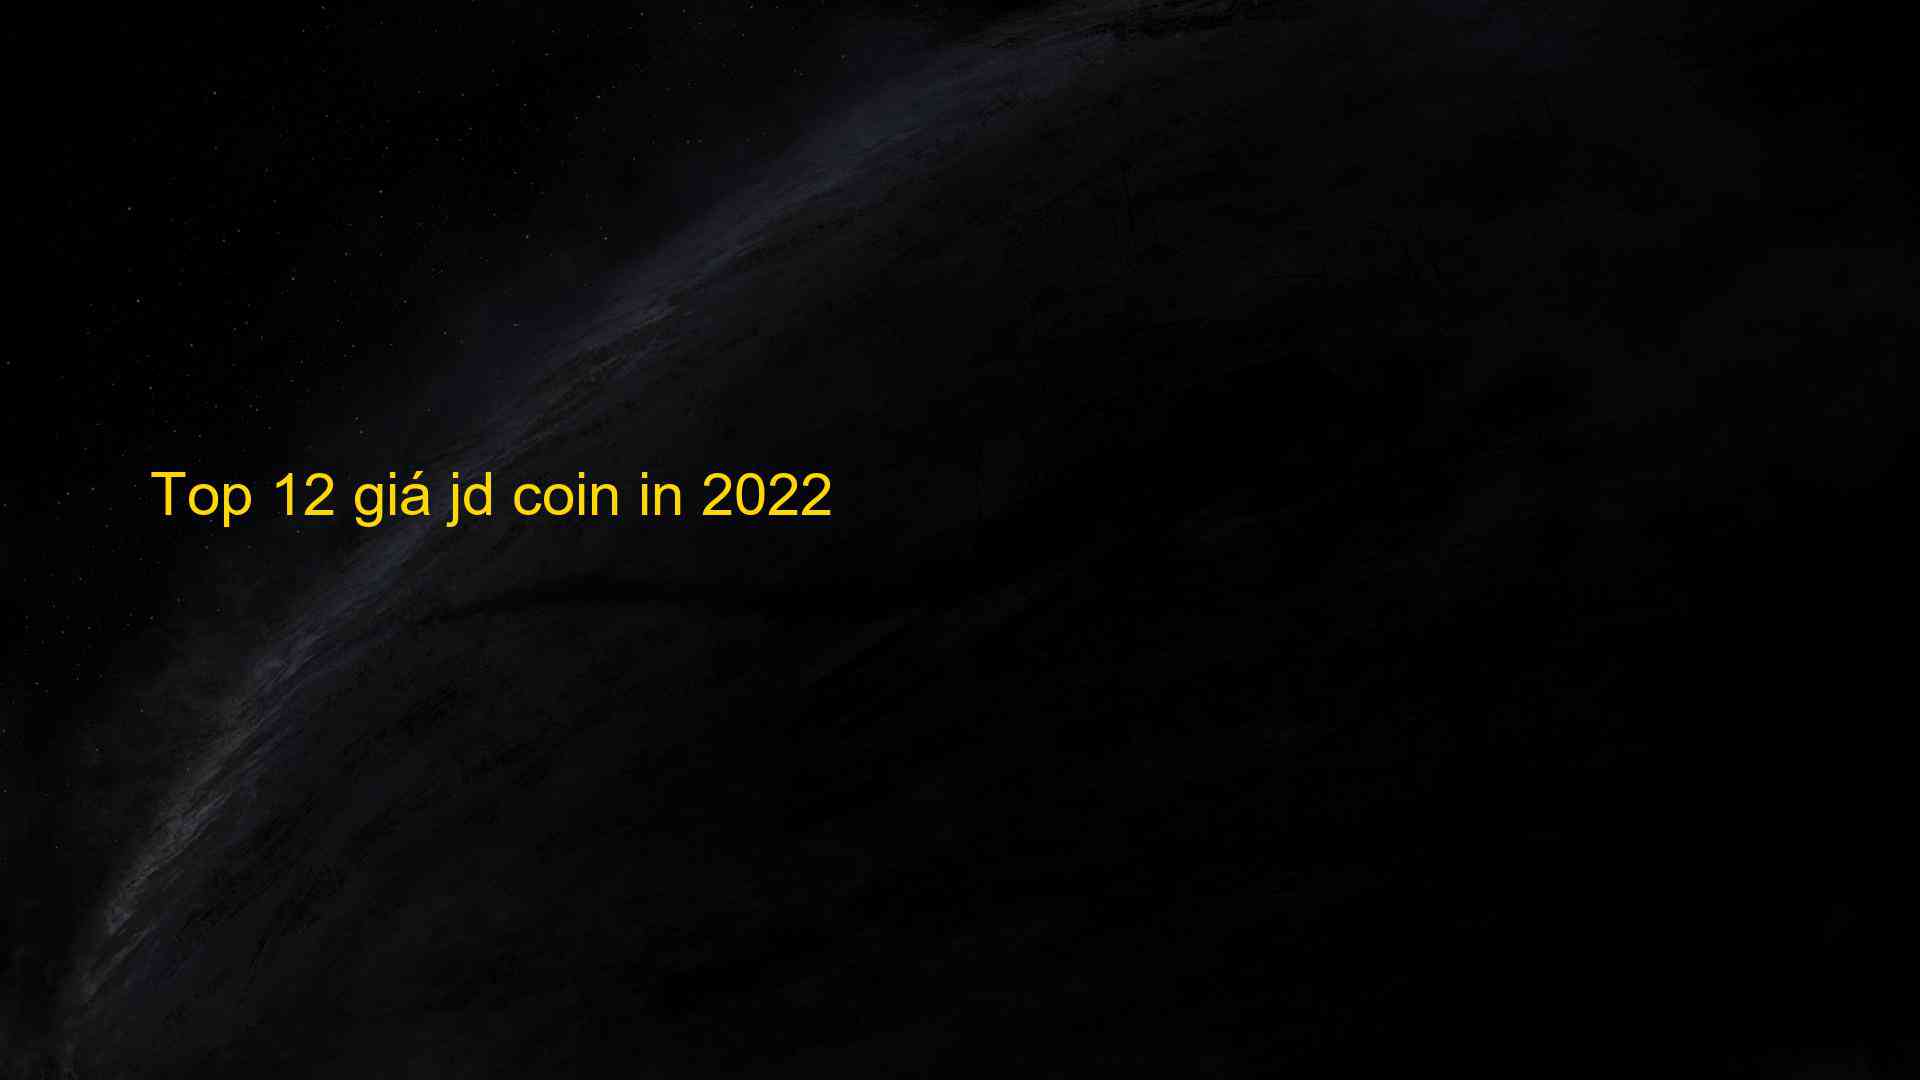 Top 12 giá jd coin in 2022